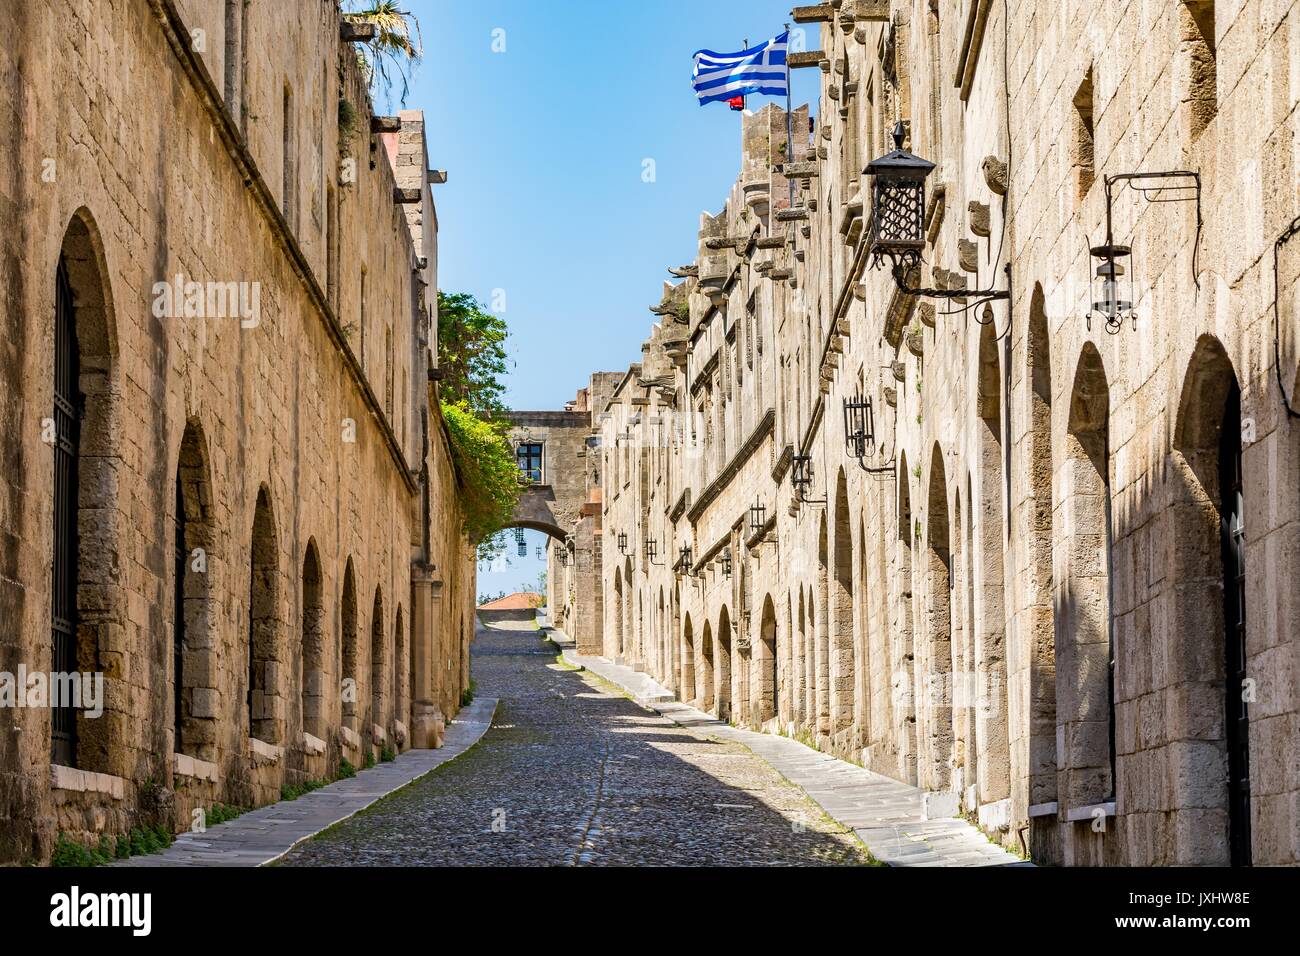 The Street of the Knights - the most famous street in Rhodes old town, Rhodes island, Greece Stock Photo